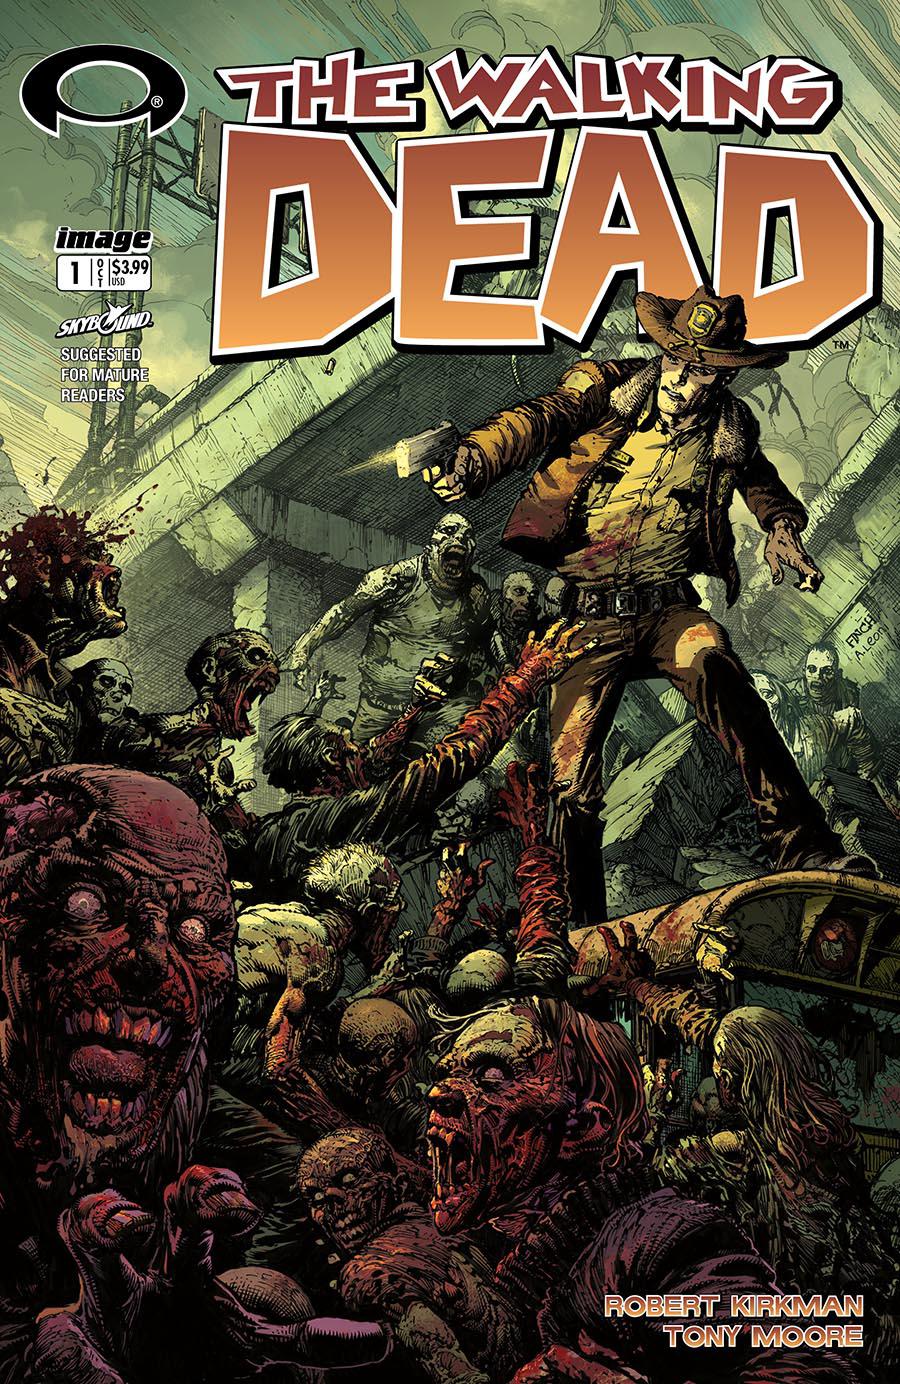 Walking Dead 15th Anniversary Blind Bag Edition #1 Cover B David Finch Color Cover Without Polybag